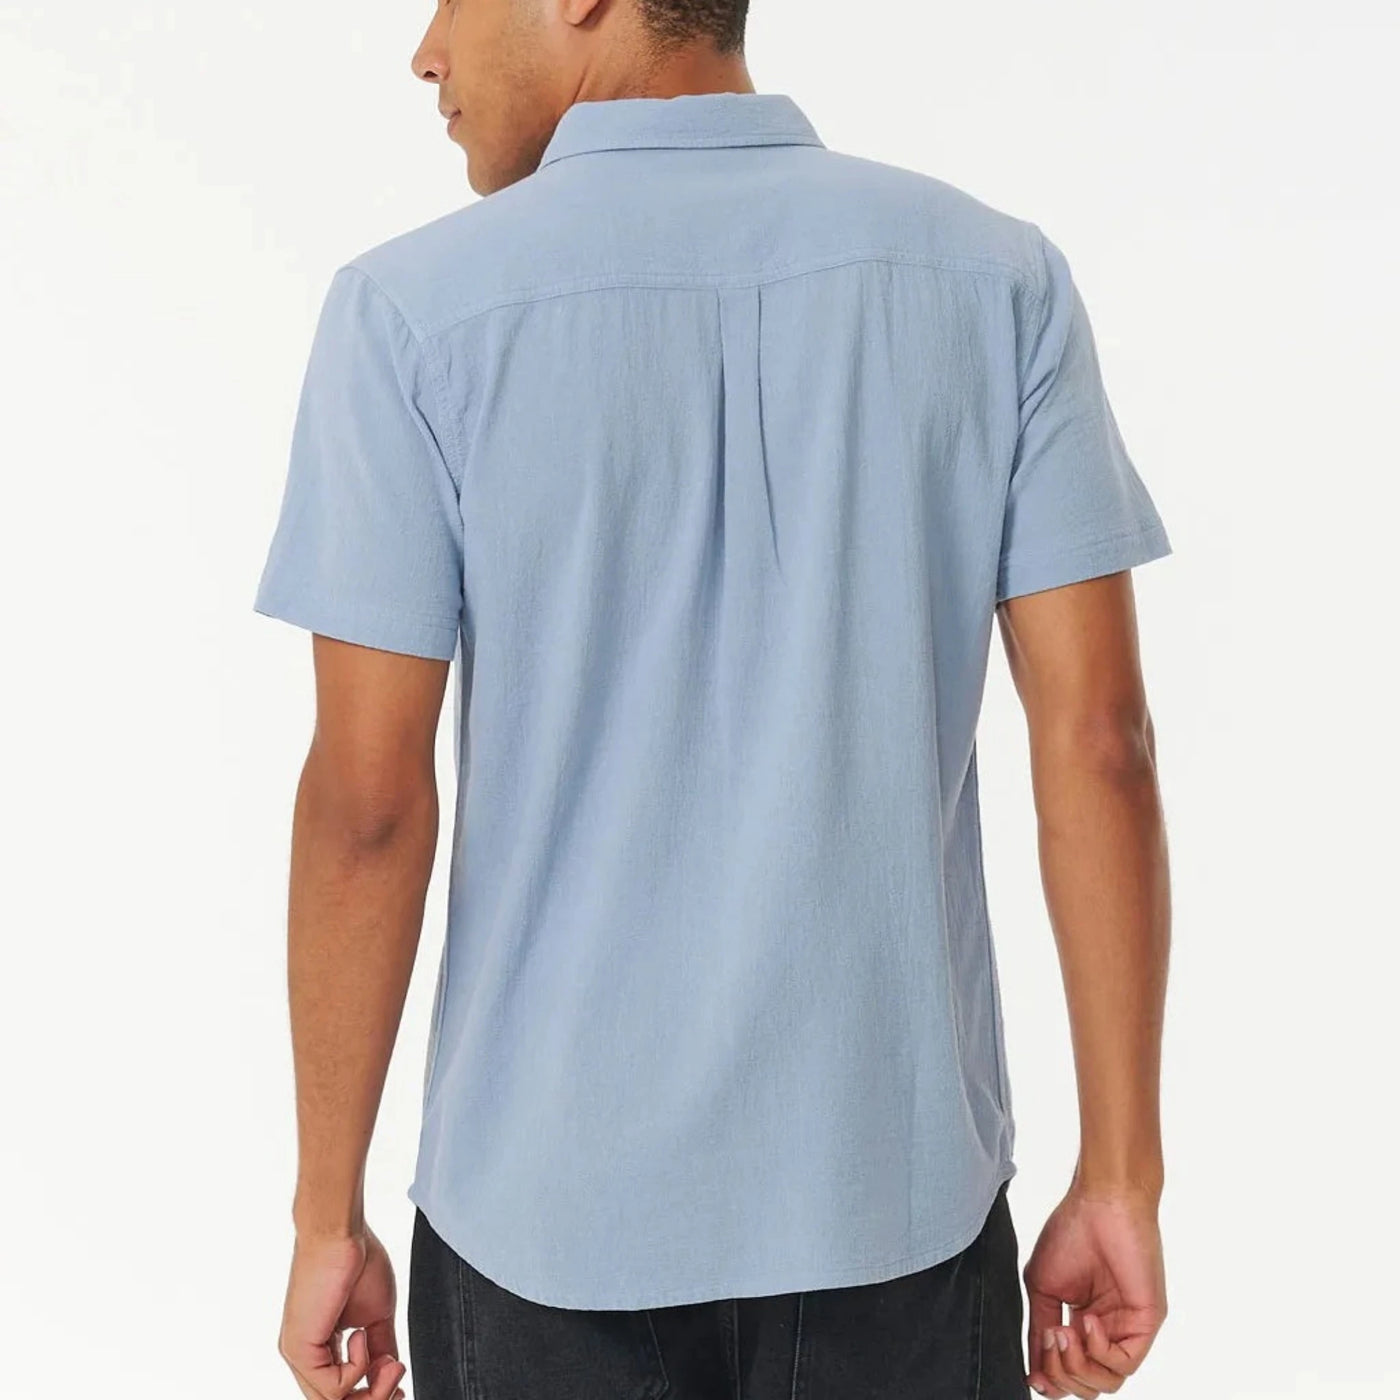 Rip Curl Washed Short Sleeve Shirt - Dusty Blue